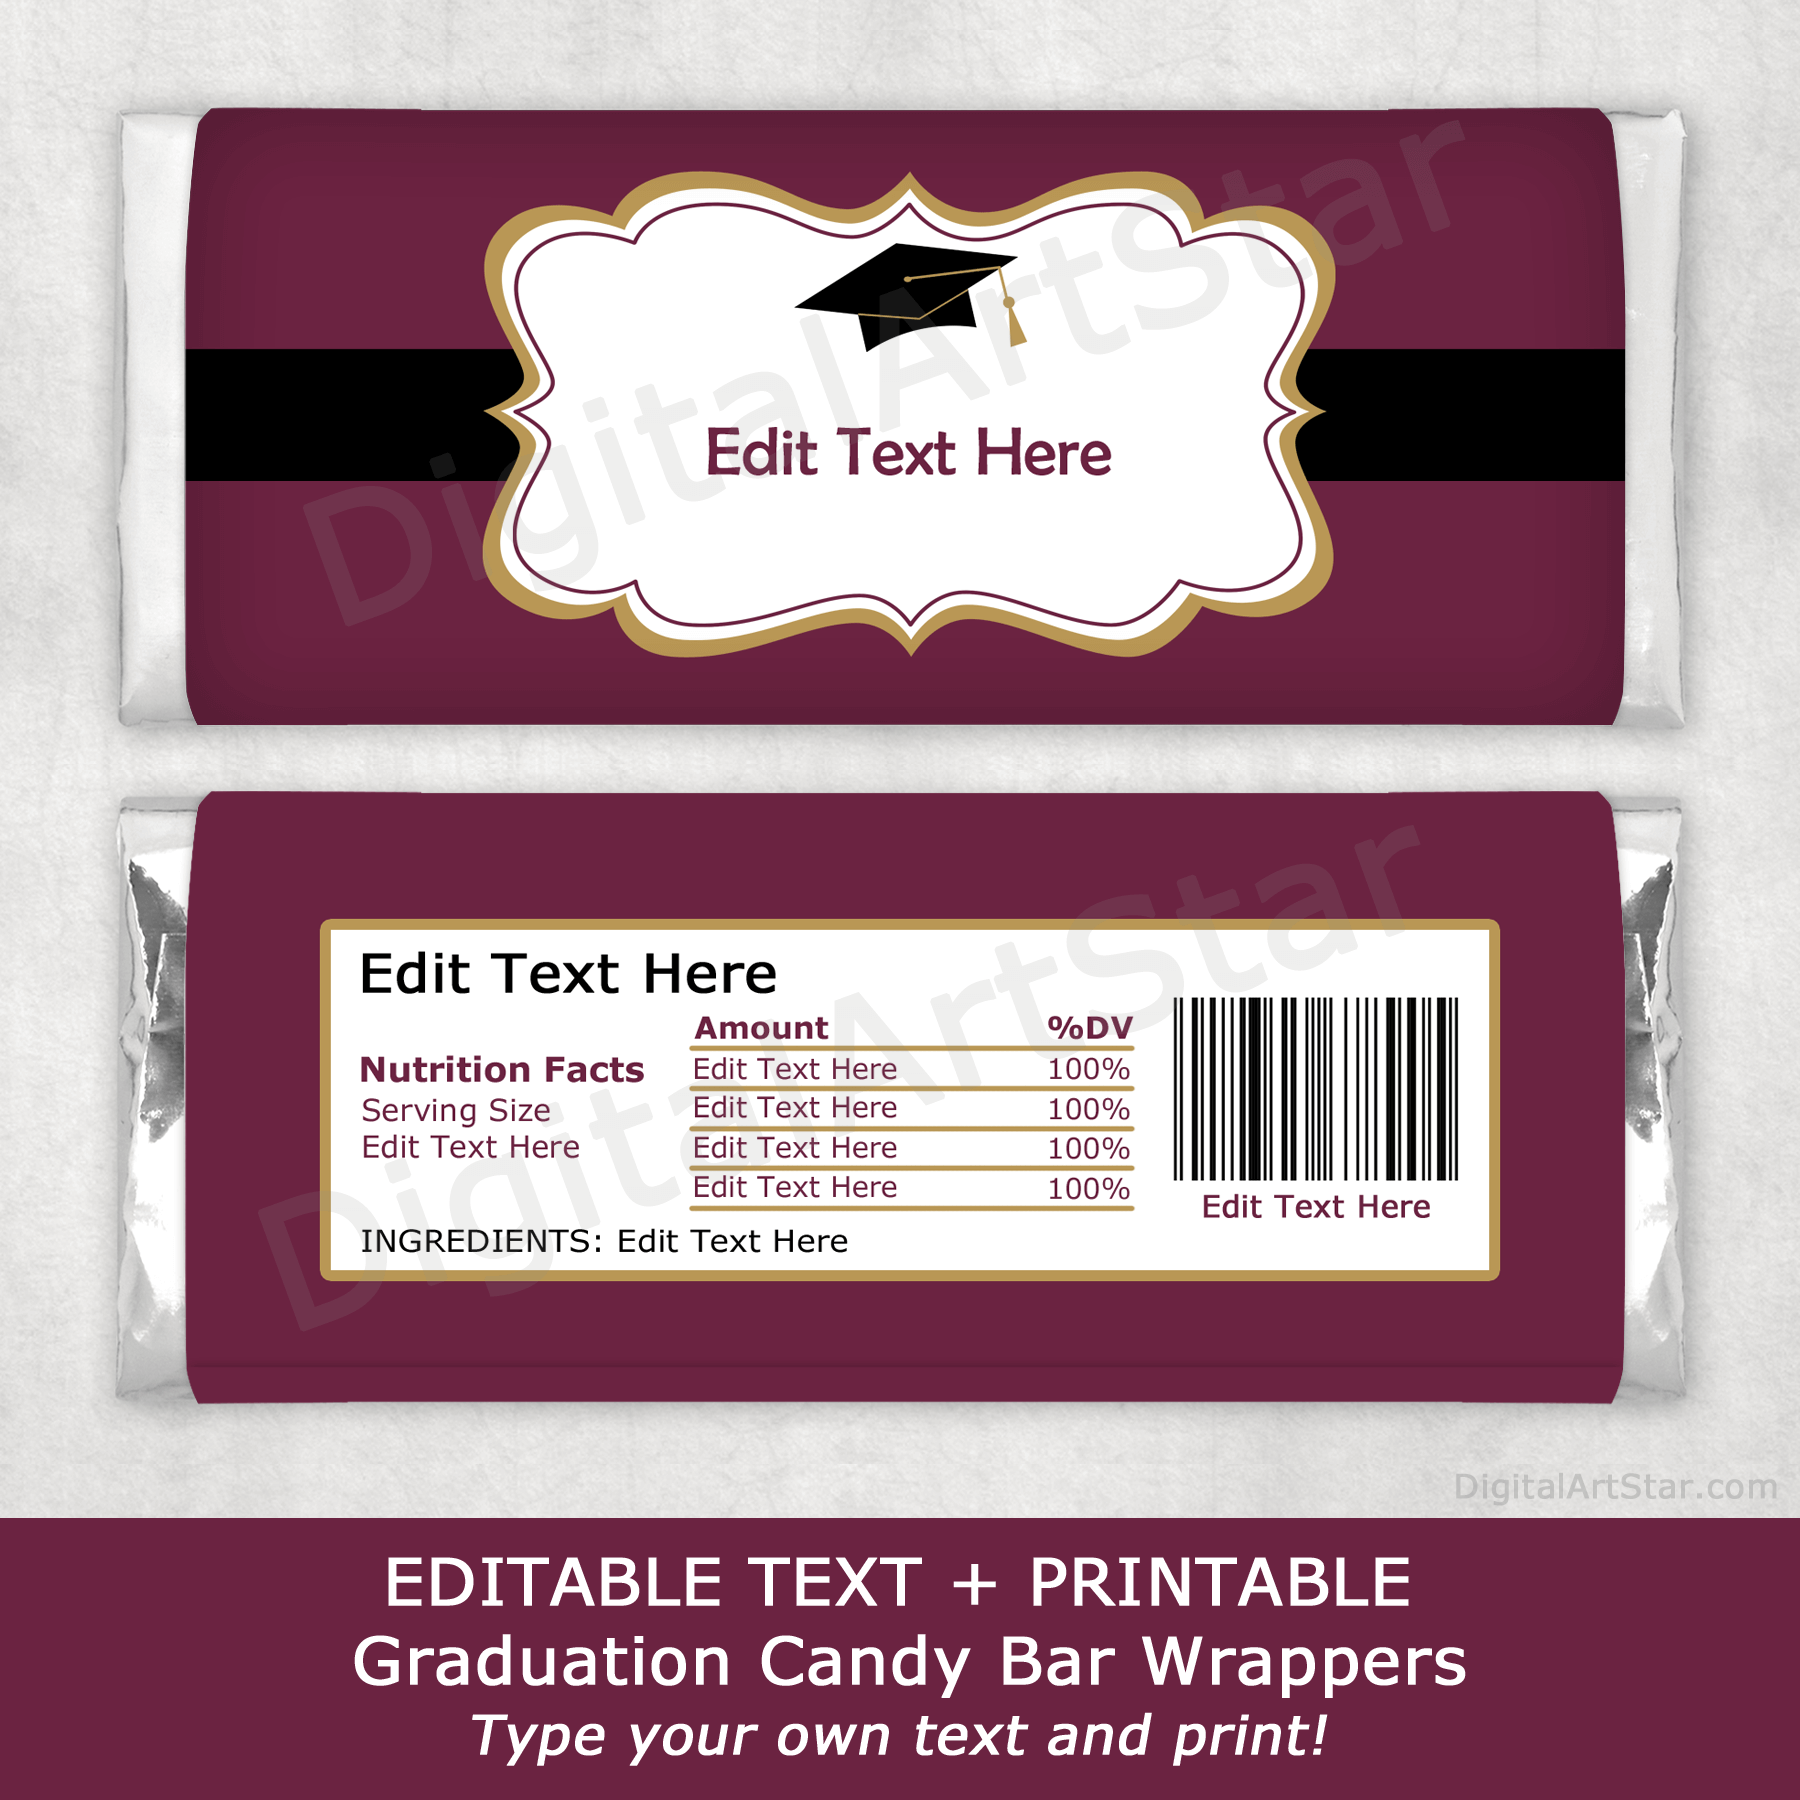 Maroon Graduation Chocolate Bar Wrappers with Black and Gold Accents